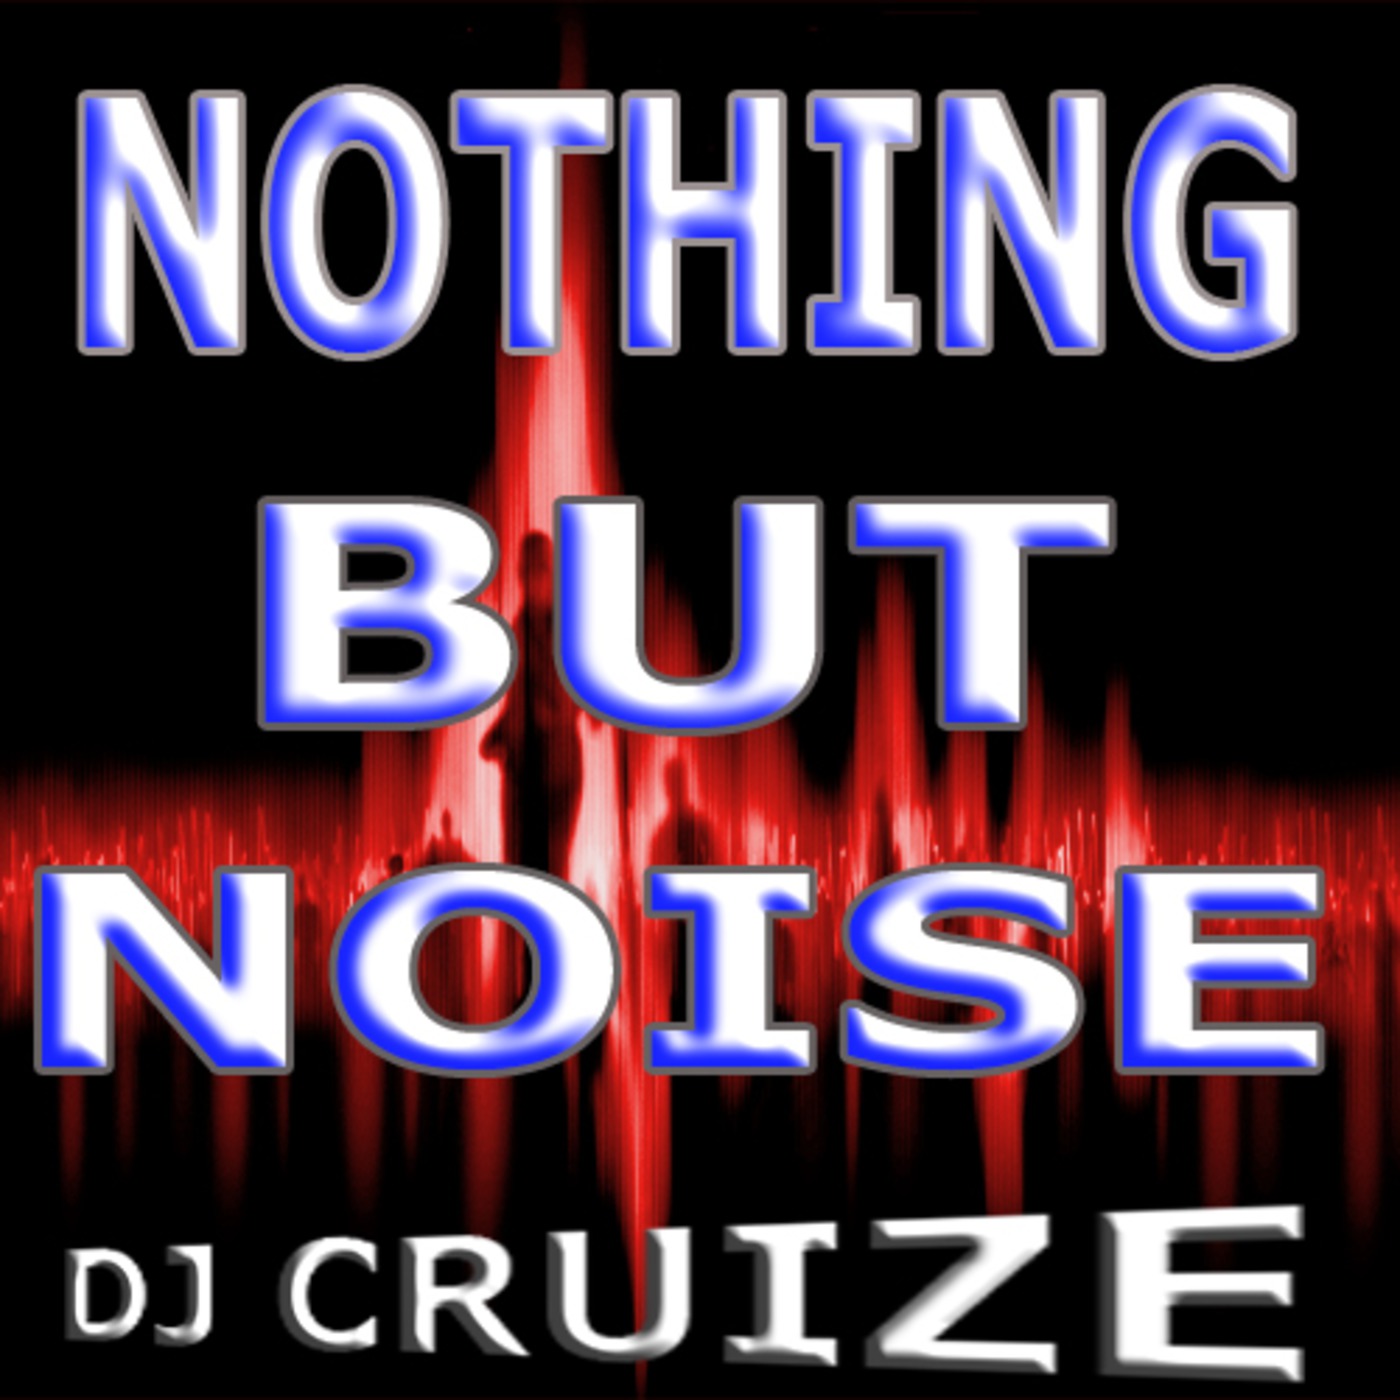 Nothing But Noise ”House Trax”